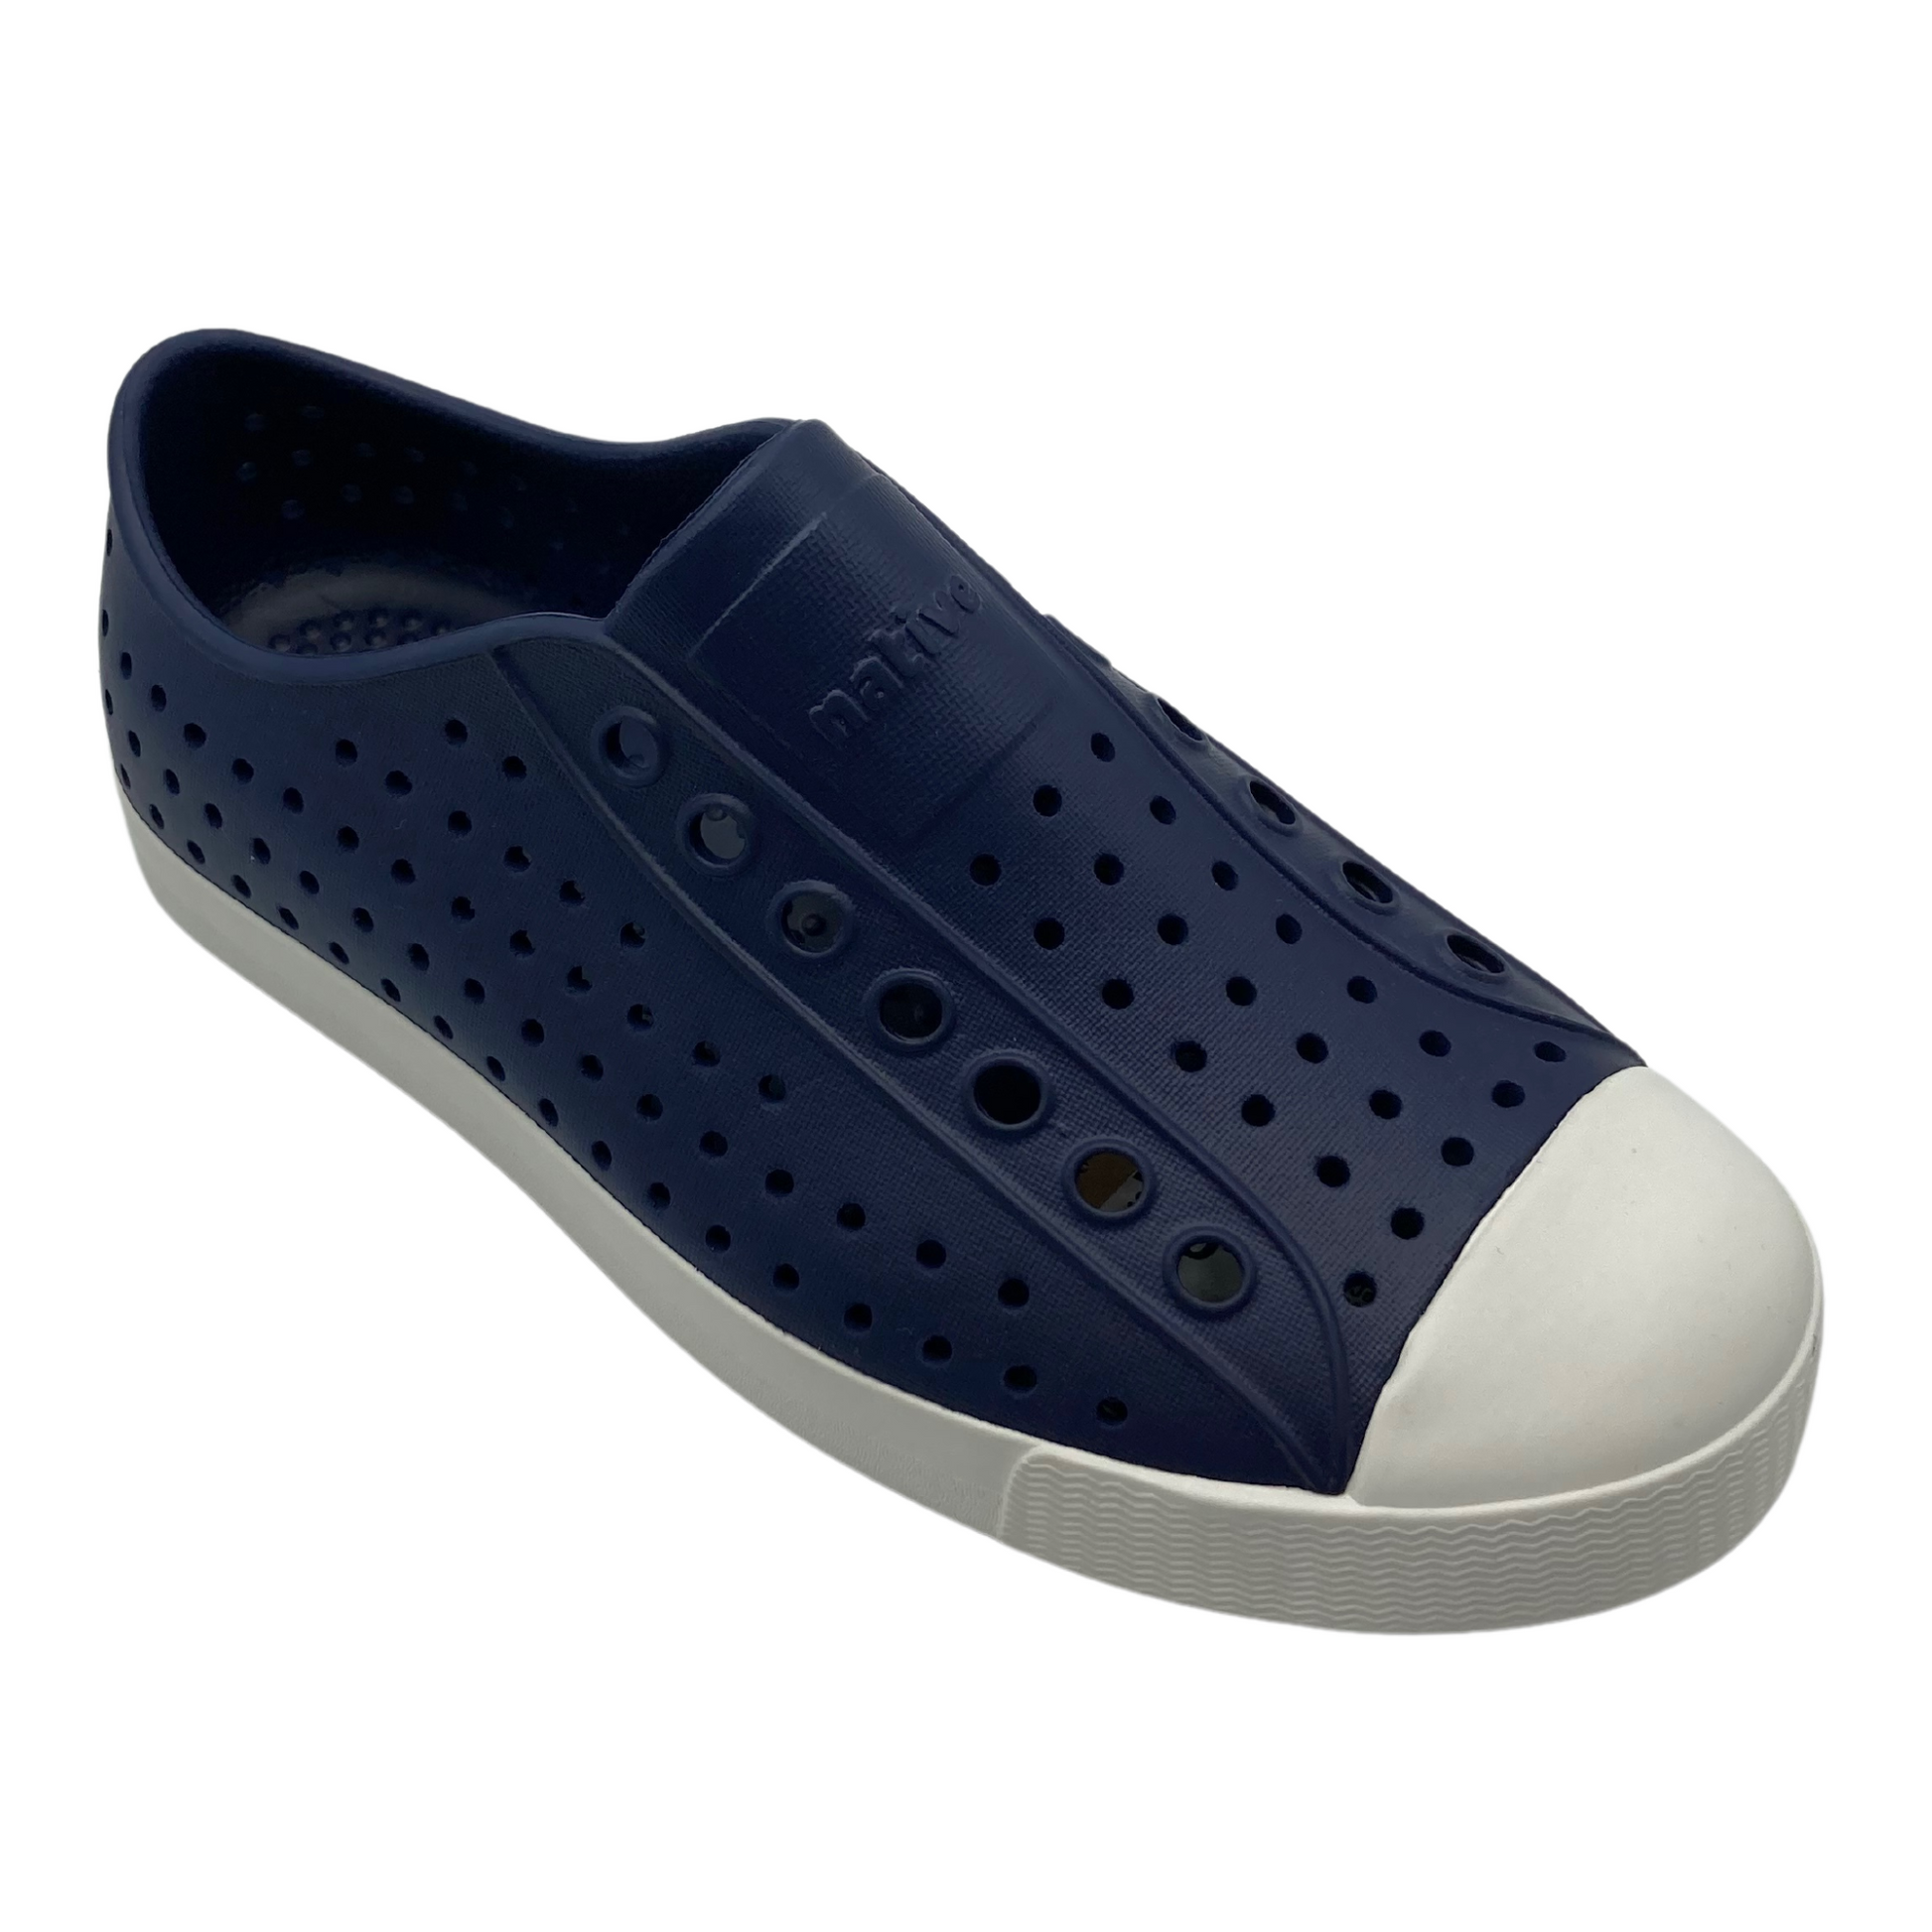 A dark navy sneaker with perforations and a white toe box and sole is pictured at a slight angle.